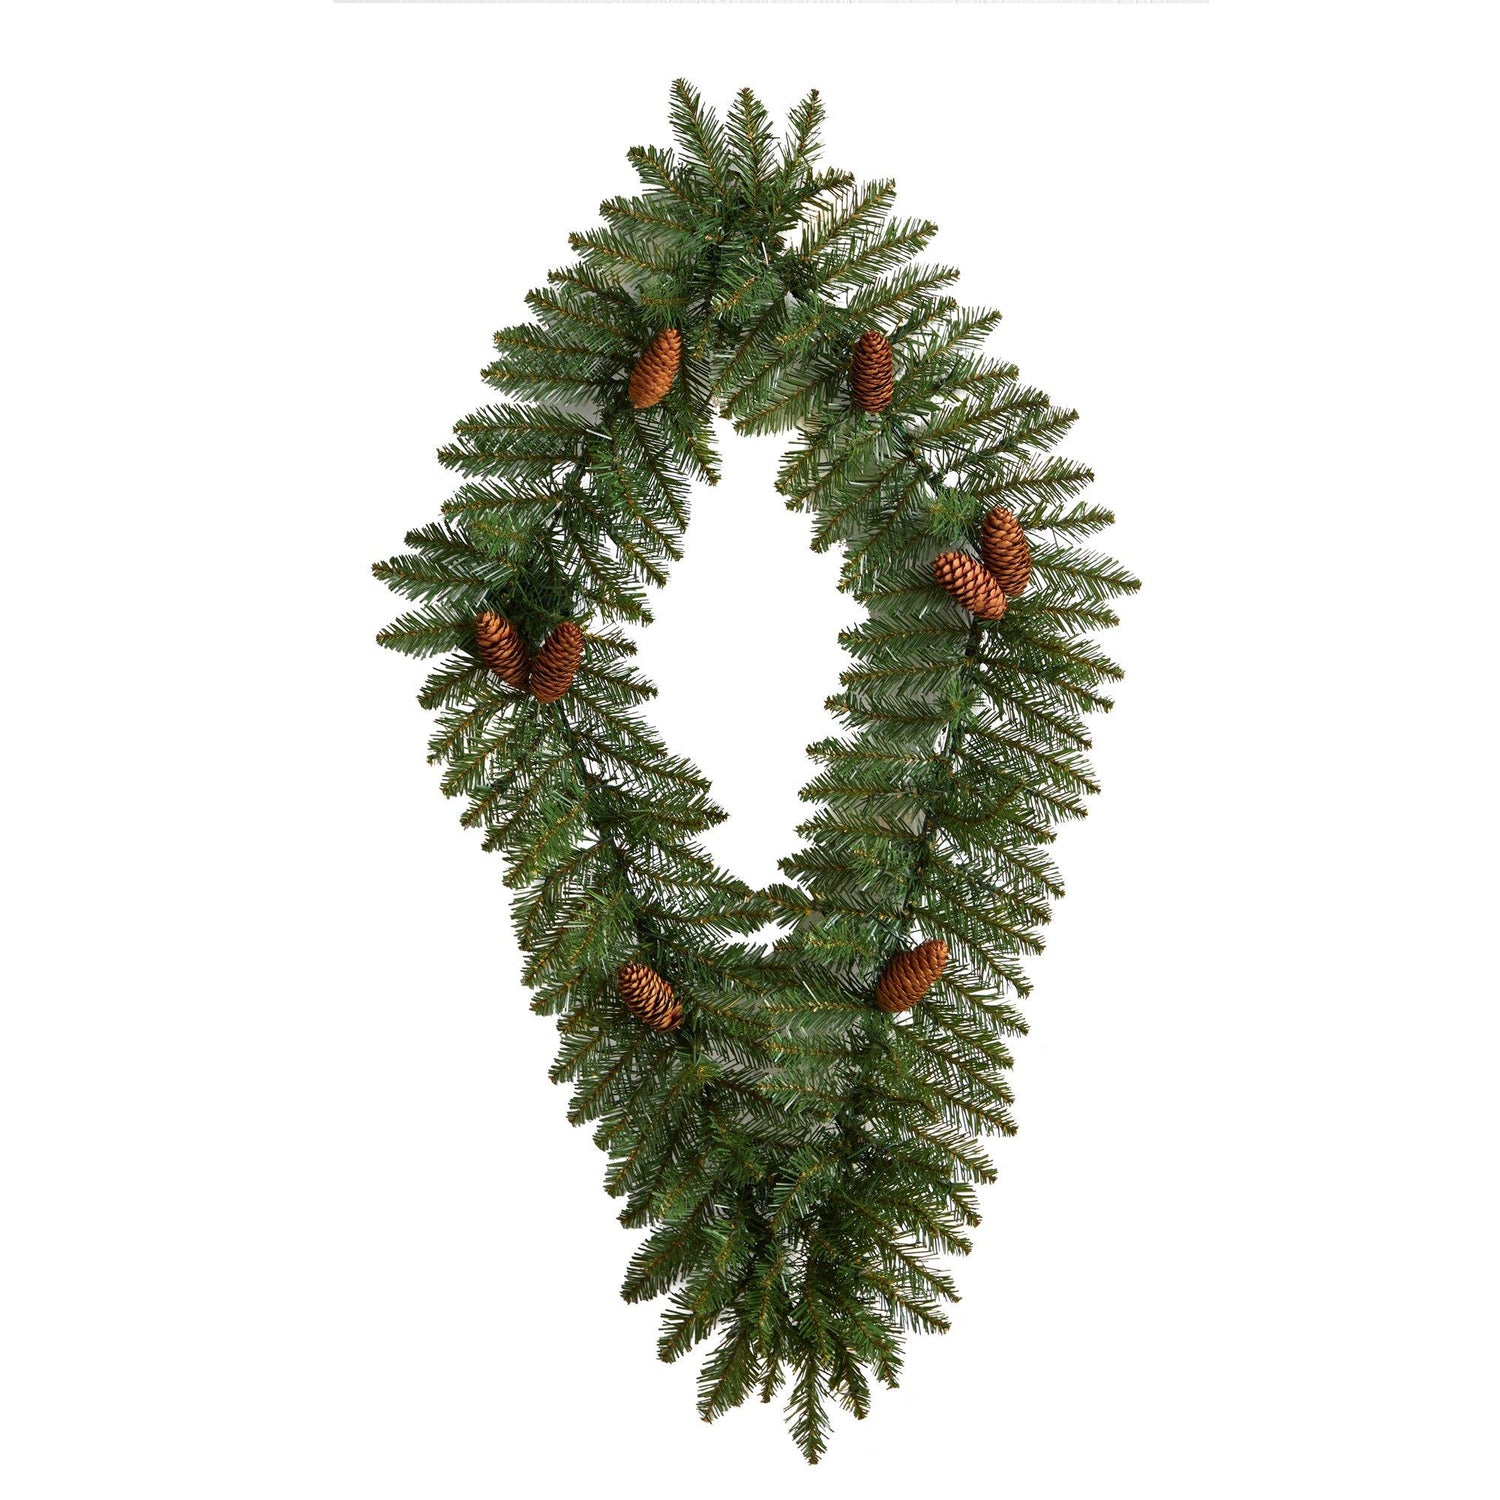 3' Holiday Christmas Geometric Diamond Wreath with Pinecones and 50 Warm White LED Lights